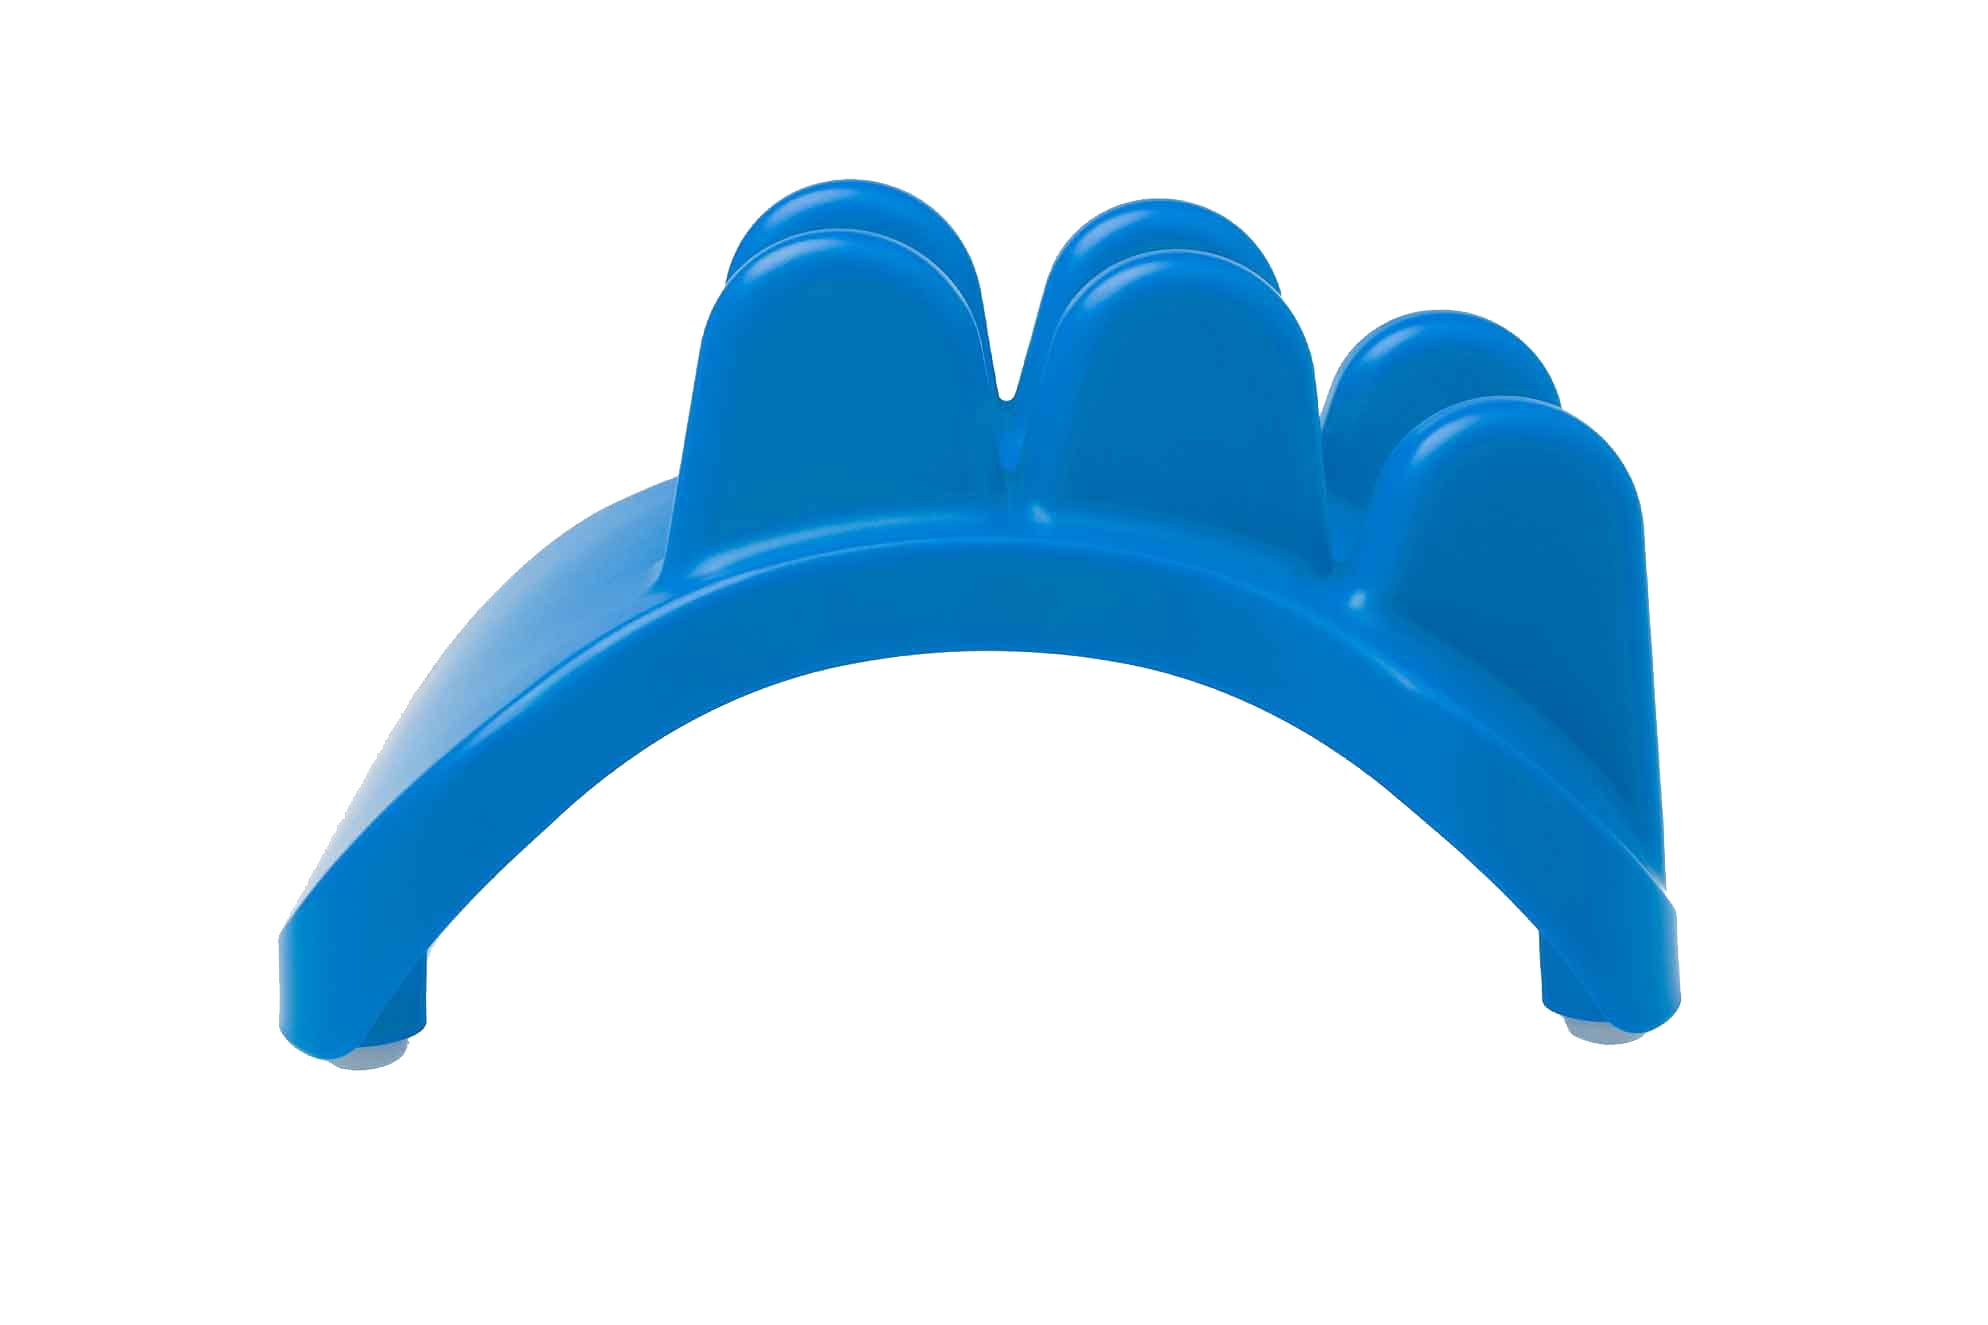 Pso-neck Muscle Release Tool, Neck Massager and Tension Reliever - Ocean Blue at PSO-RITE